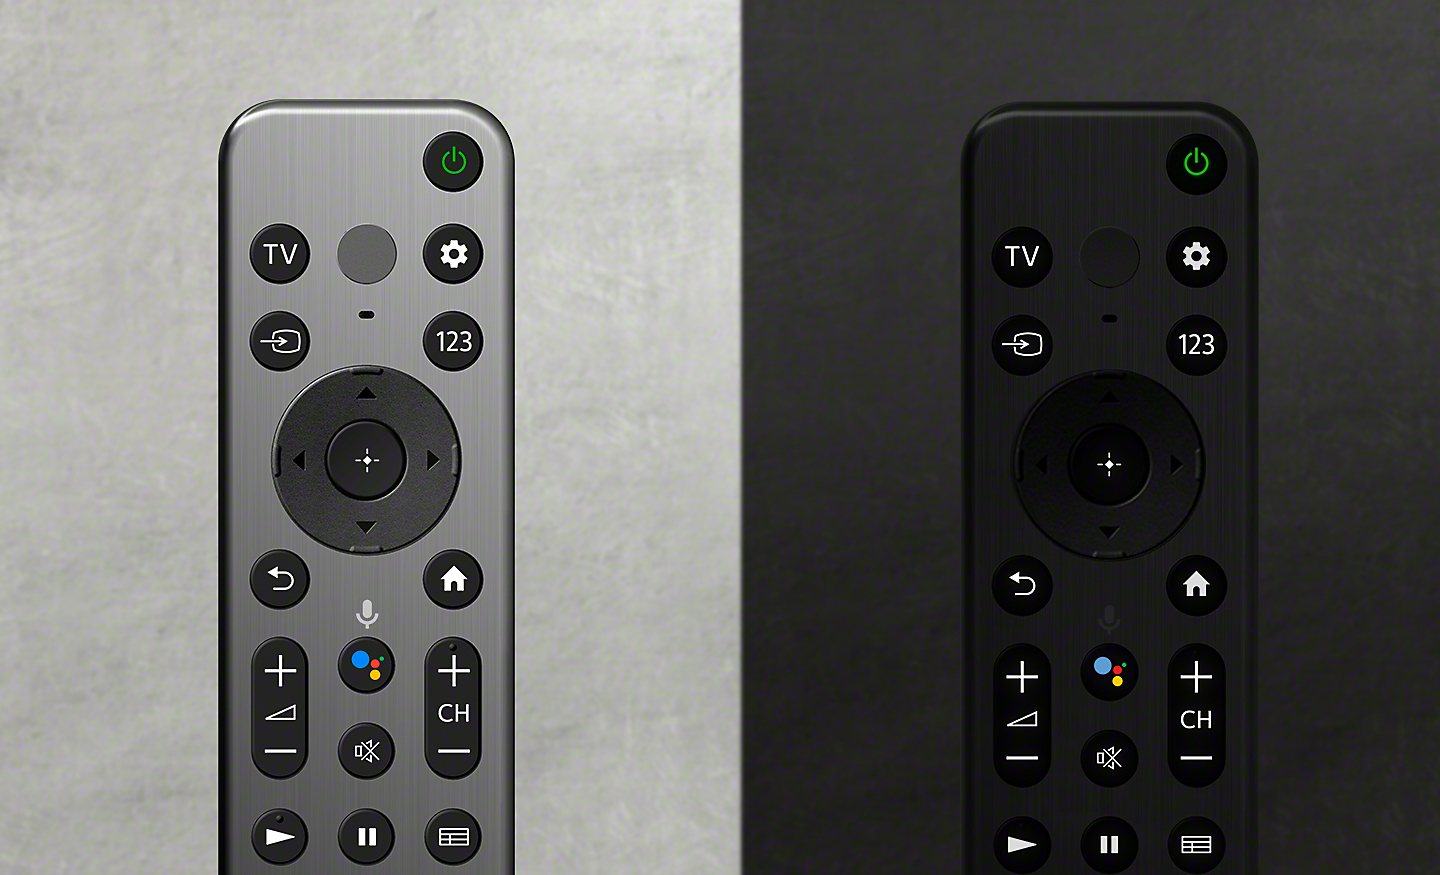  Images of two remotes, on the right a remote in silver and on the left a remote in black